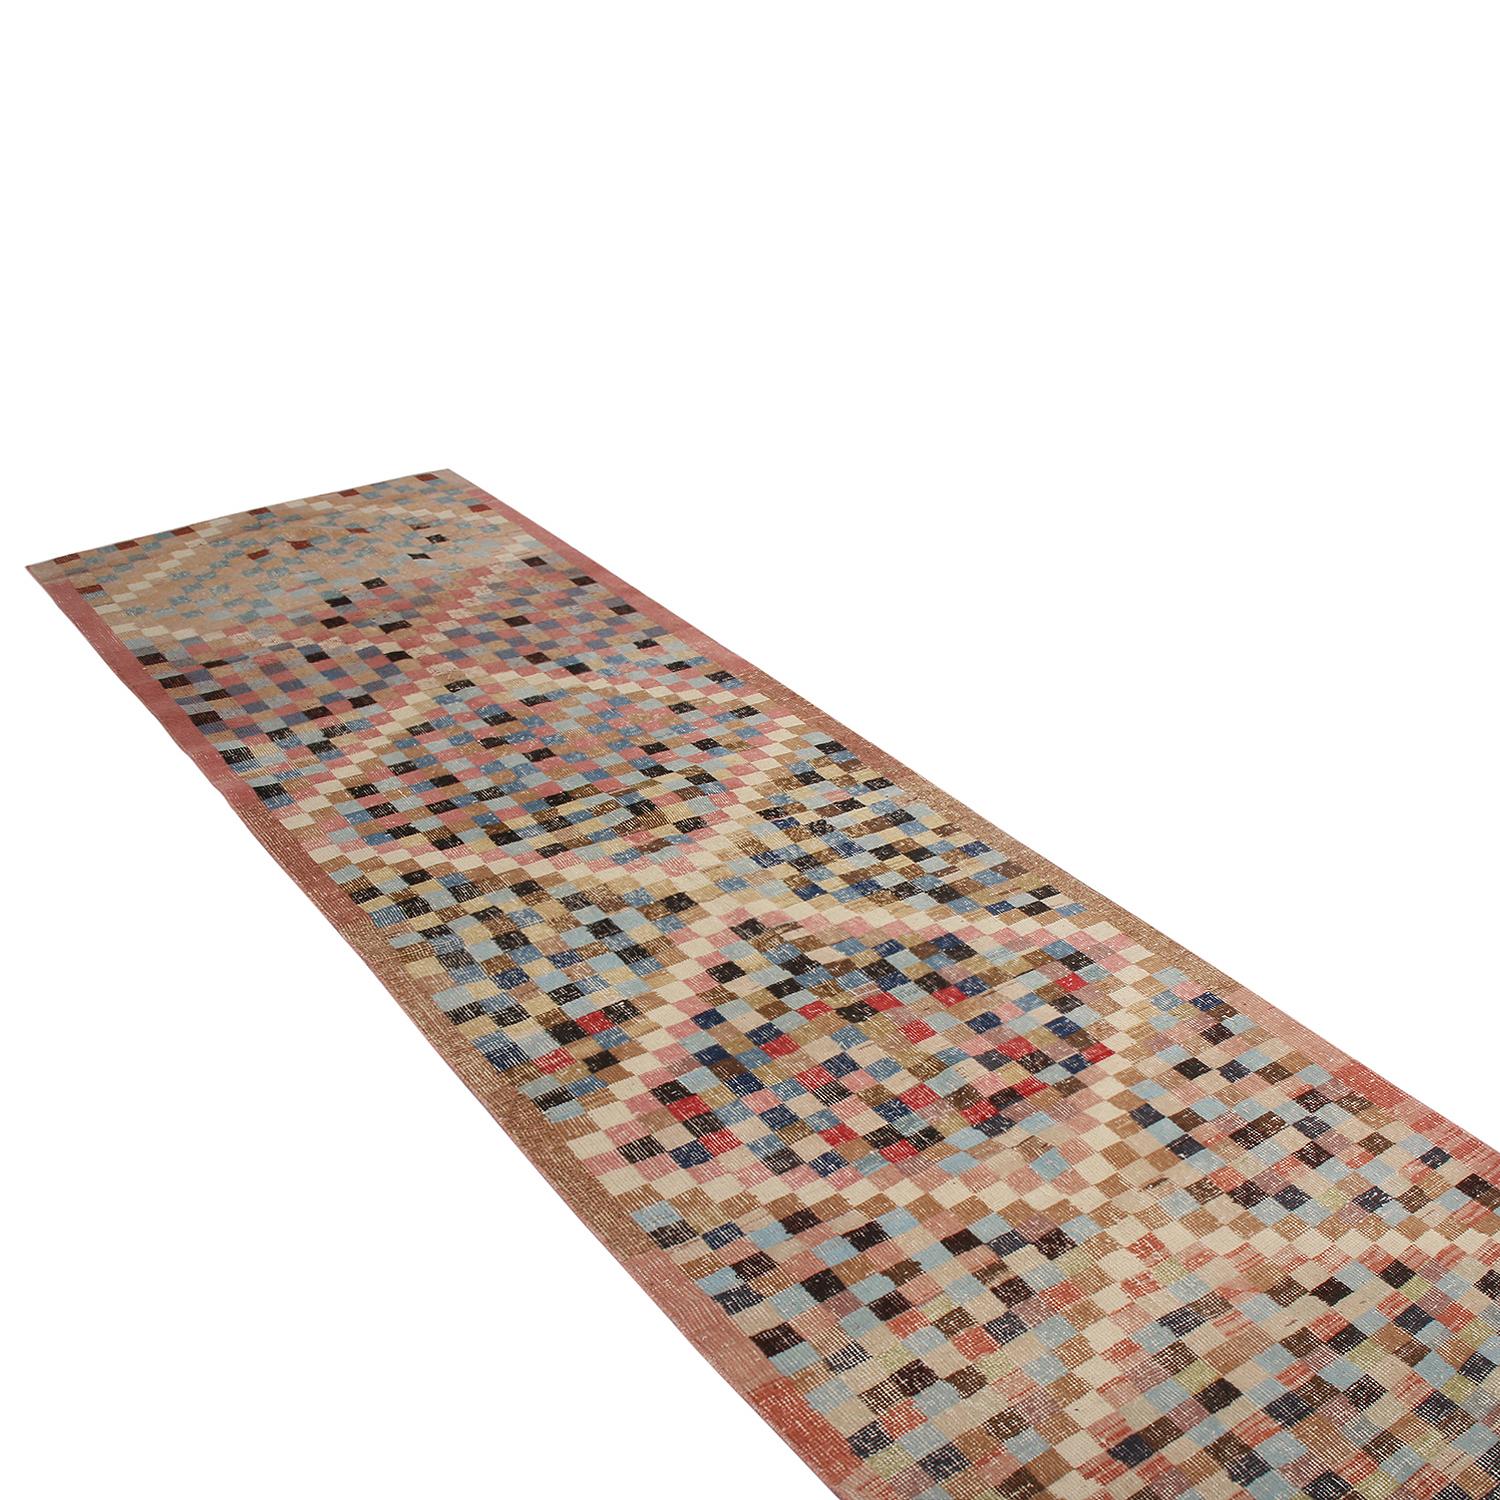 Hand knotted in Turkey originating between 1960-1970, this vintage midcentury runner is the latest to join Rug & Kilim’s midcentury Pasha collection, celebrating Turkish icon and multidisciplinary designer Zeki Müren with Josh’s hand picked